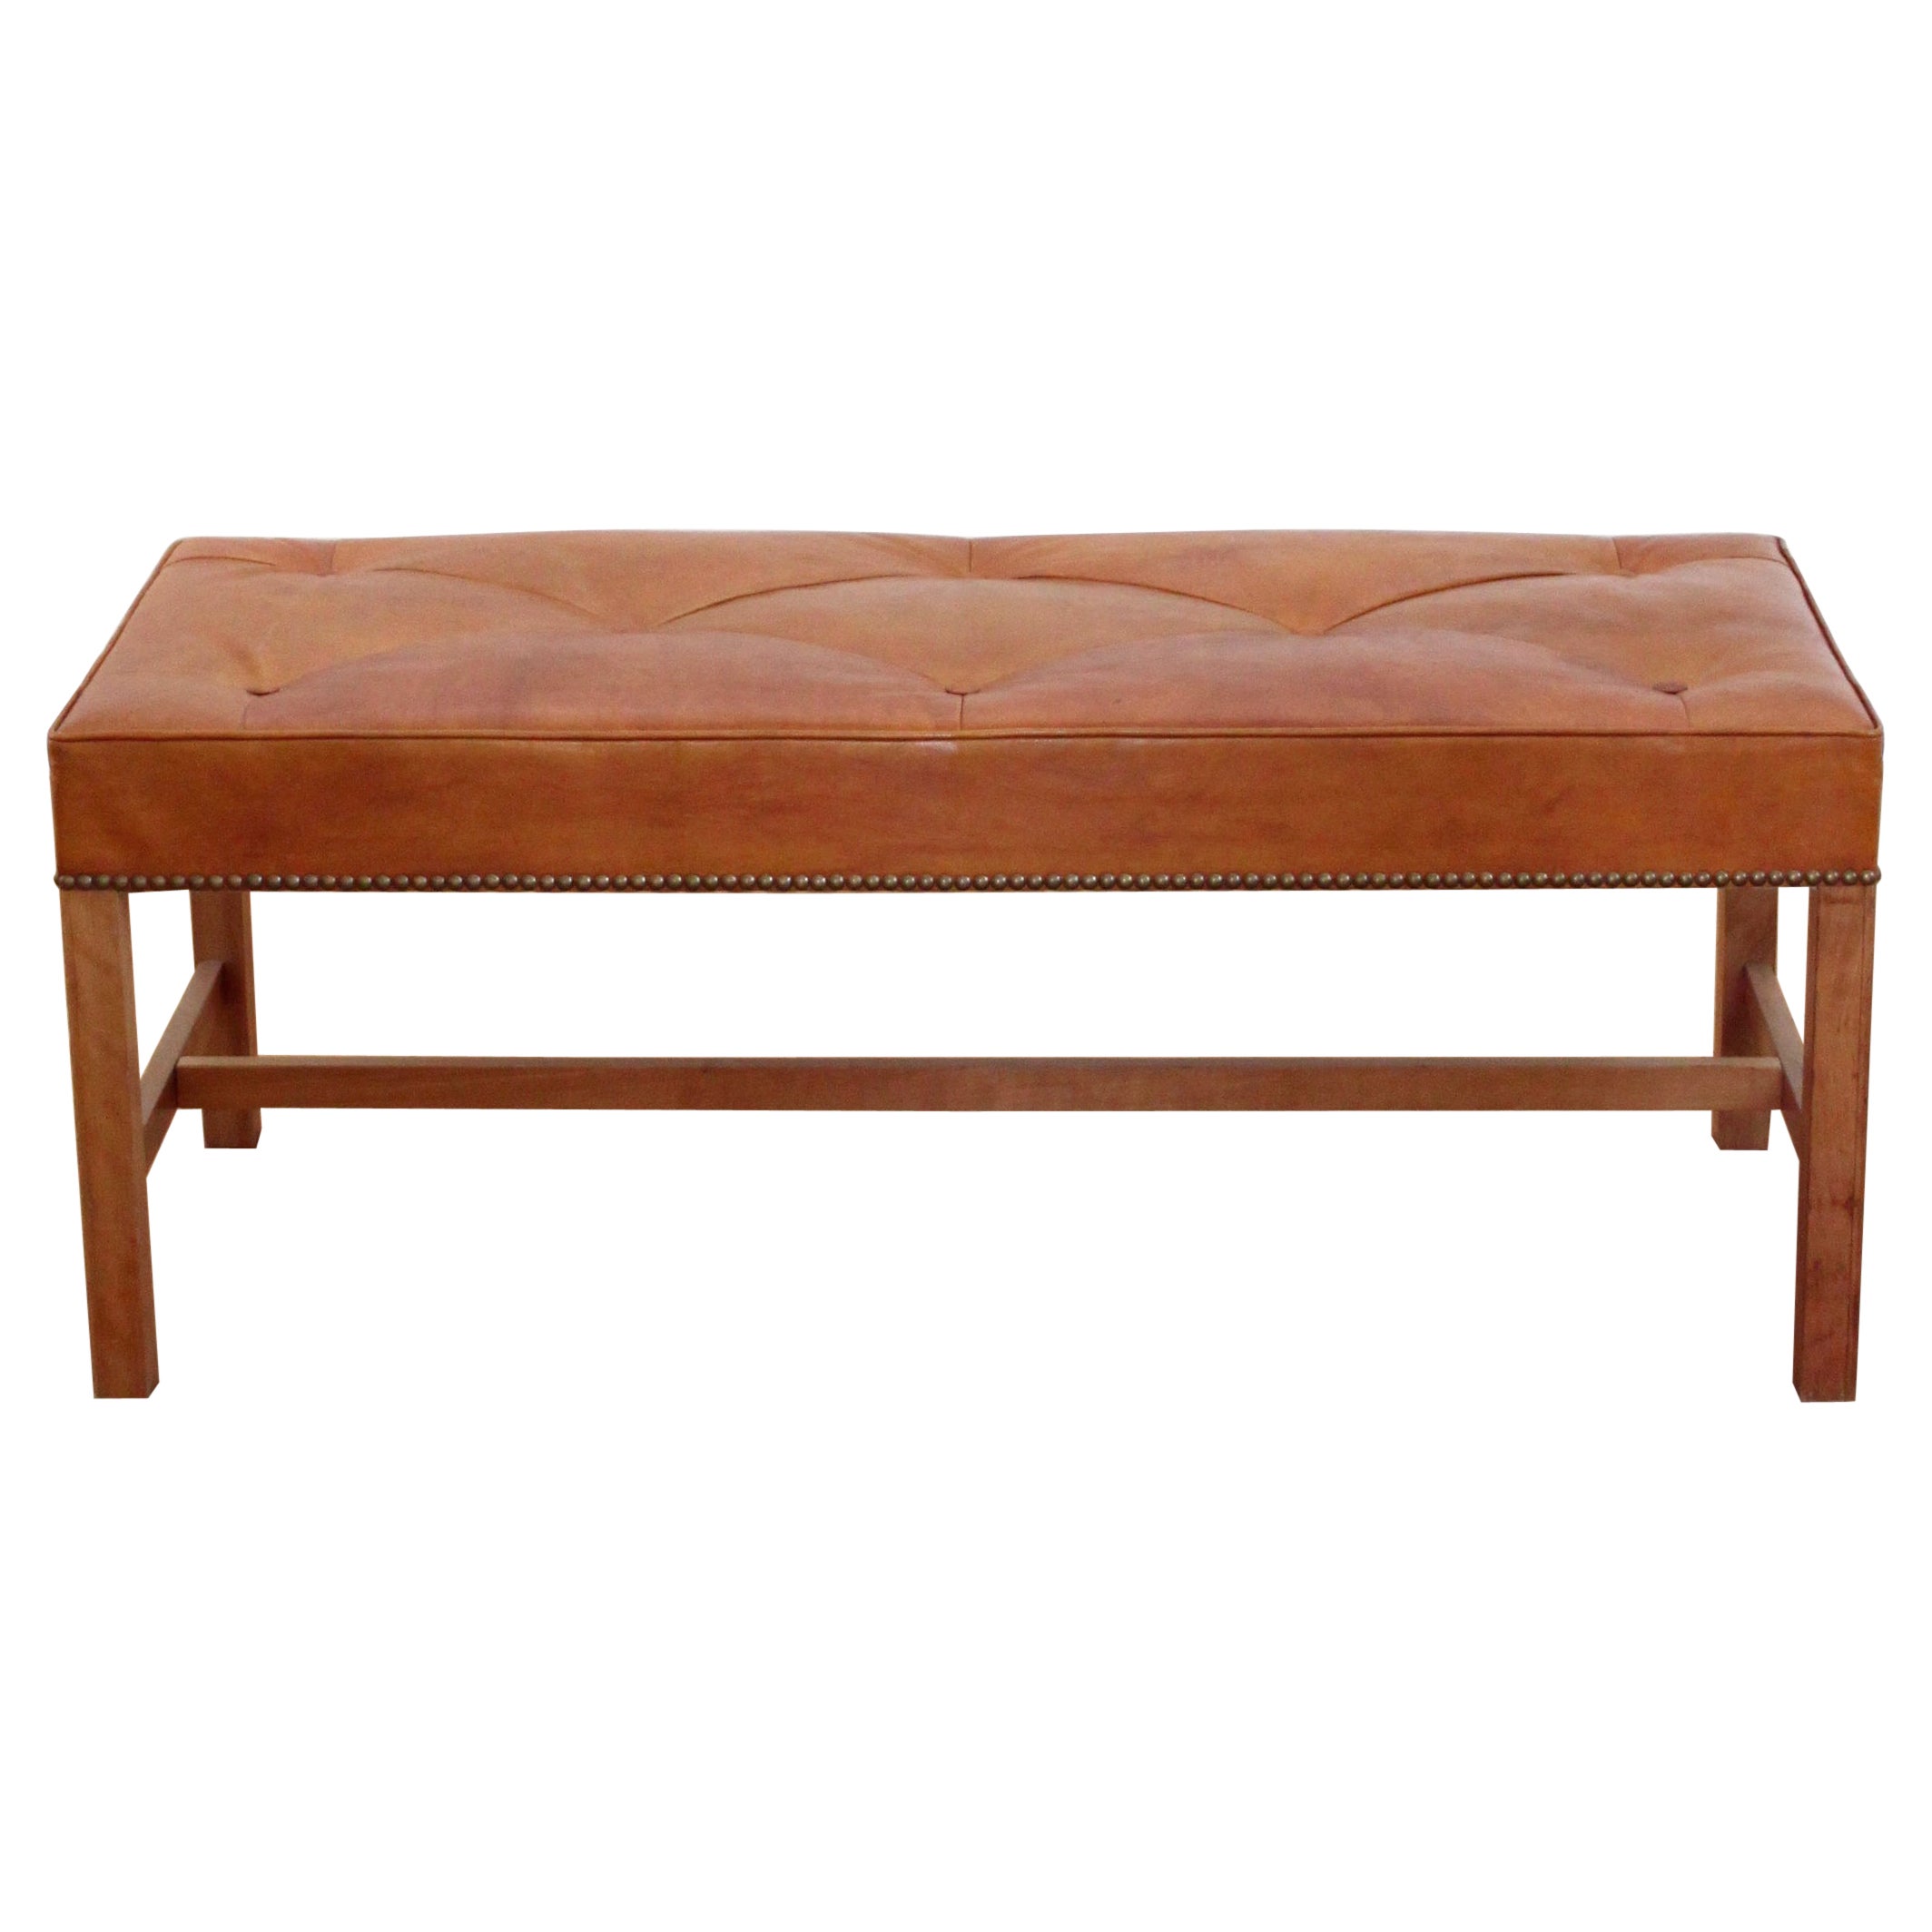 Josef Frank Bench in Mahogany and Niger Leather, Sweden 1950s